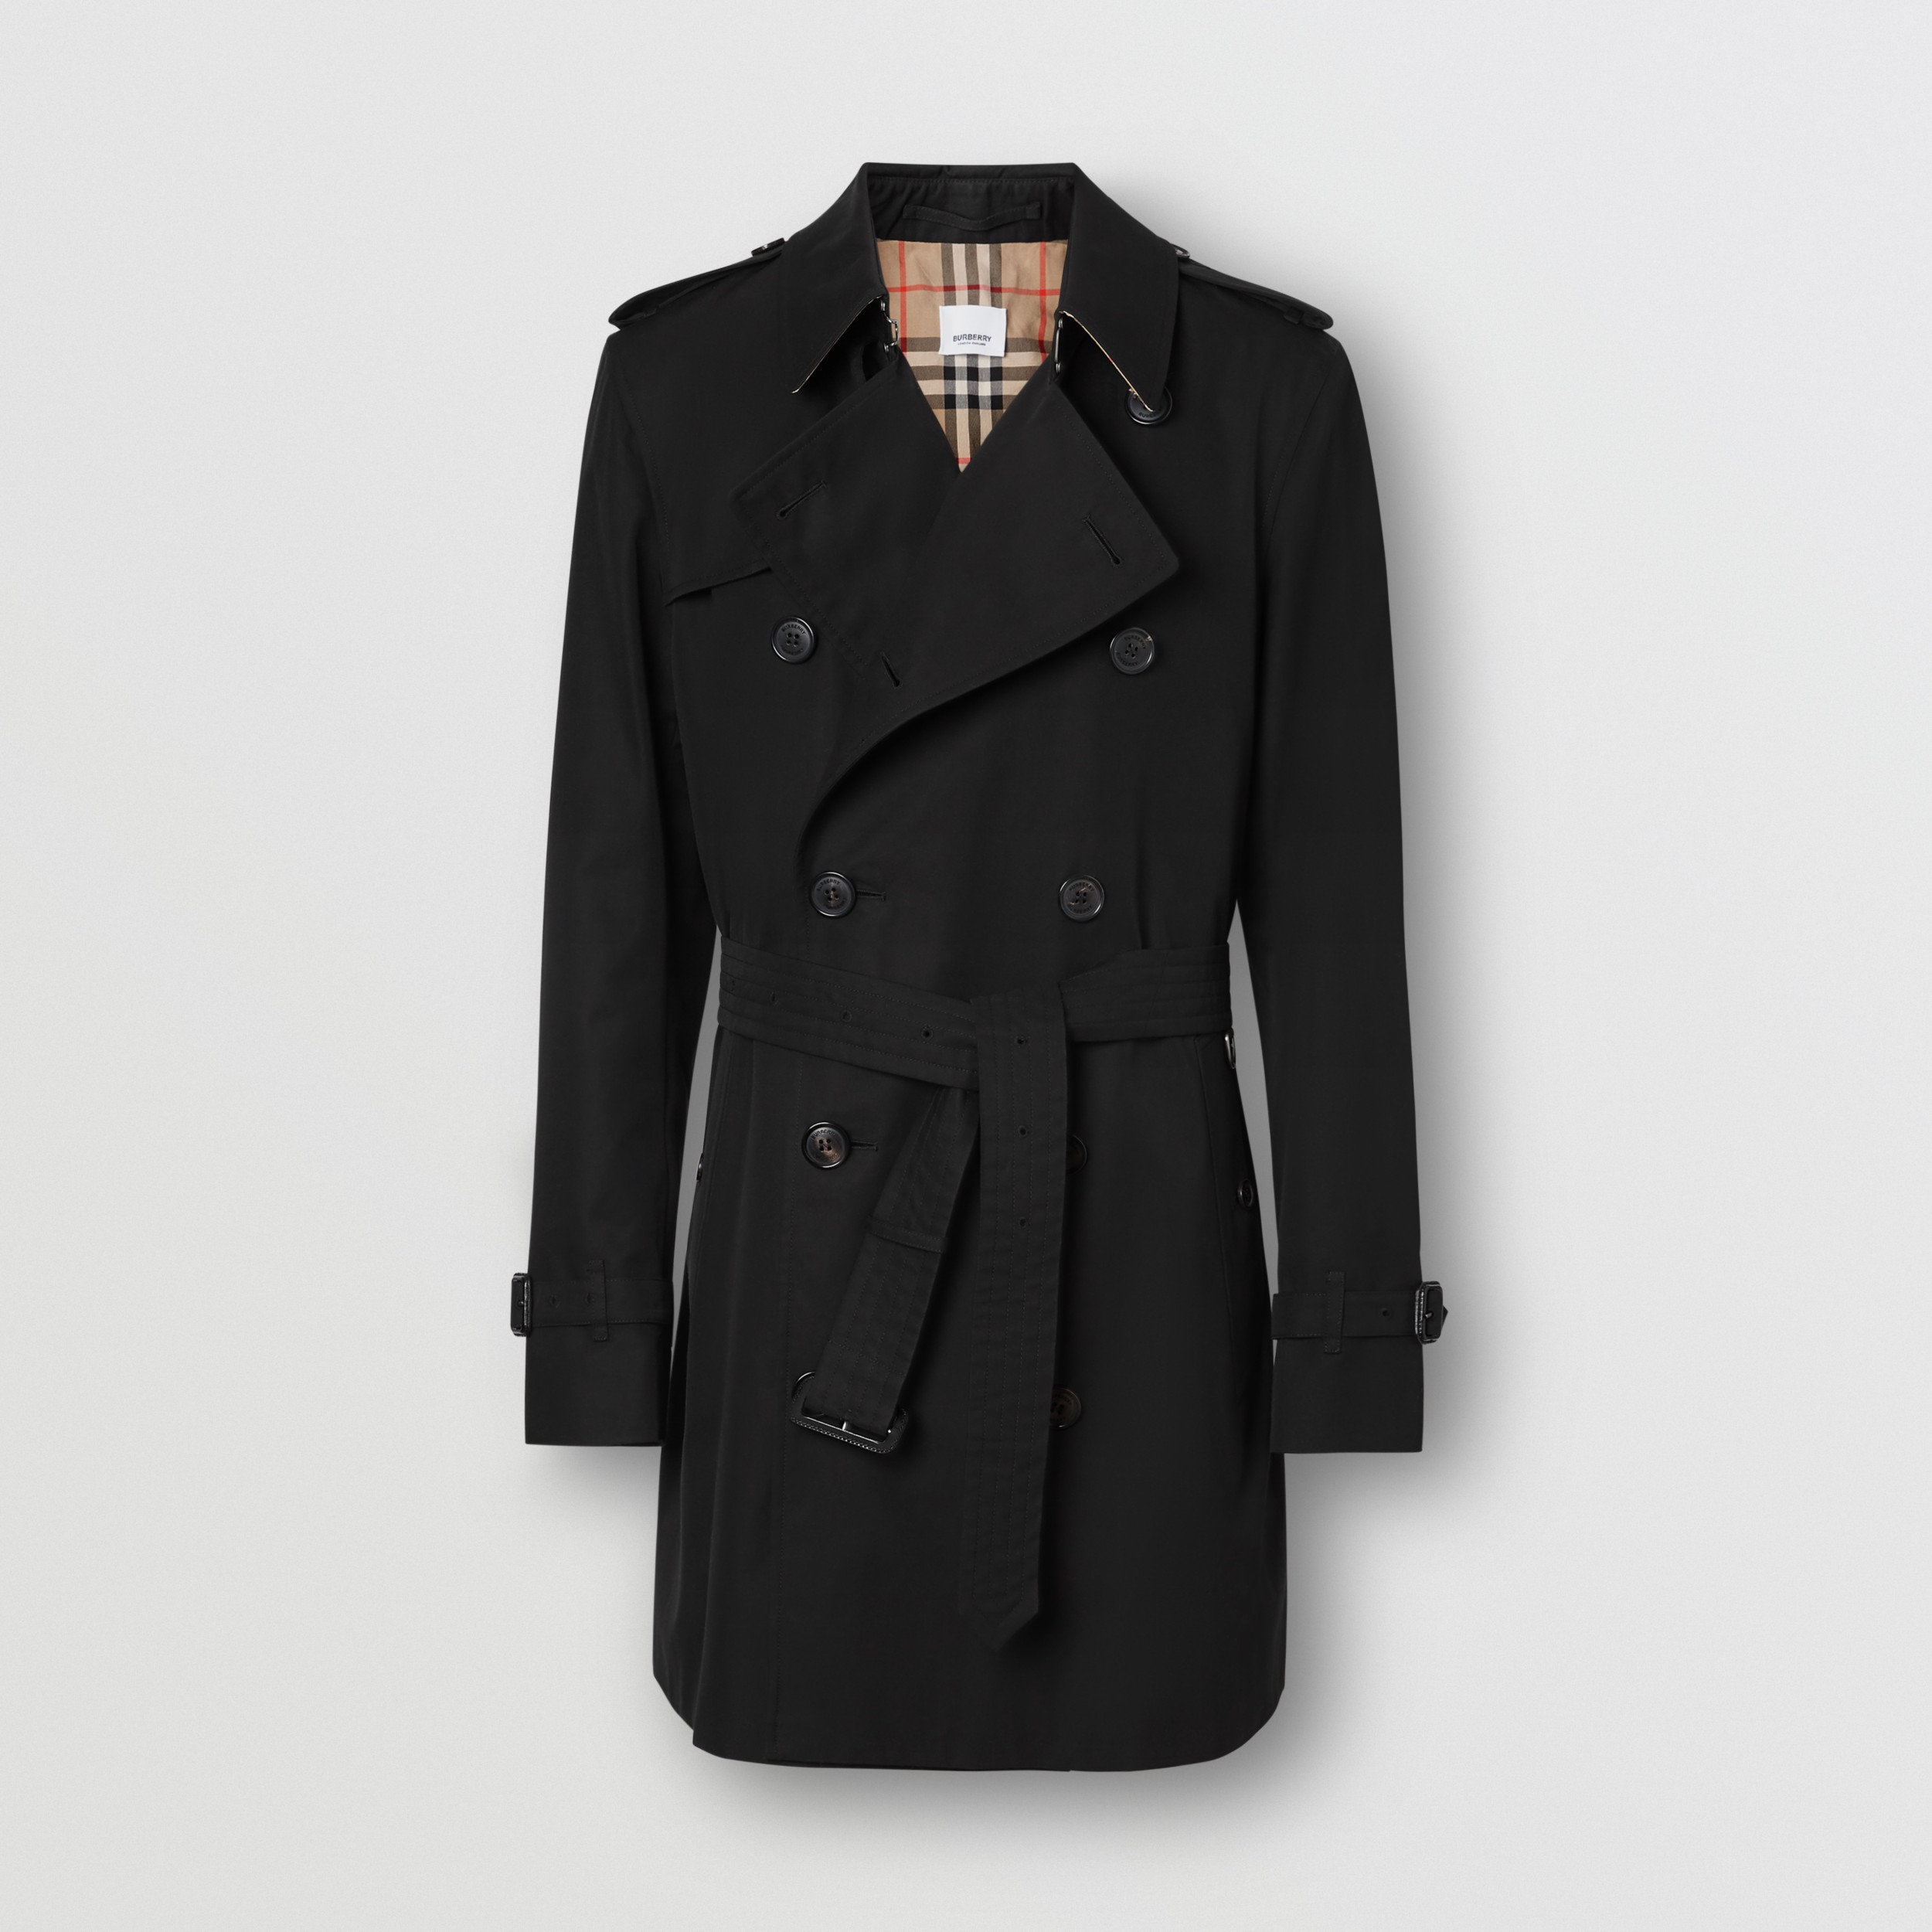 via Kilde At accelerere The Short Wimbledon Trench Coat in Black - Men | Burberry United States